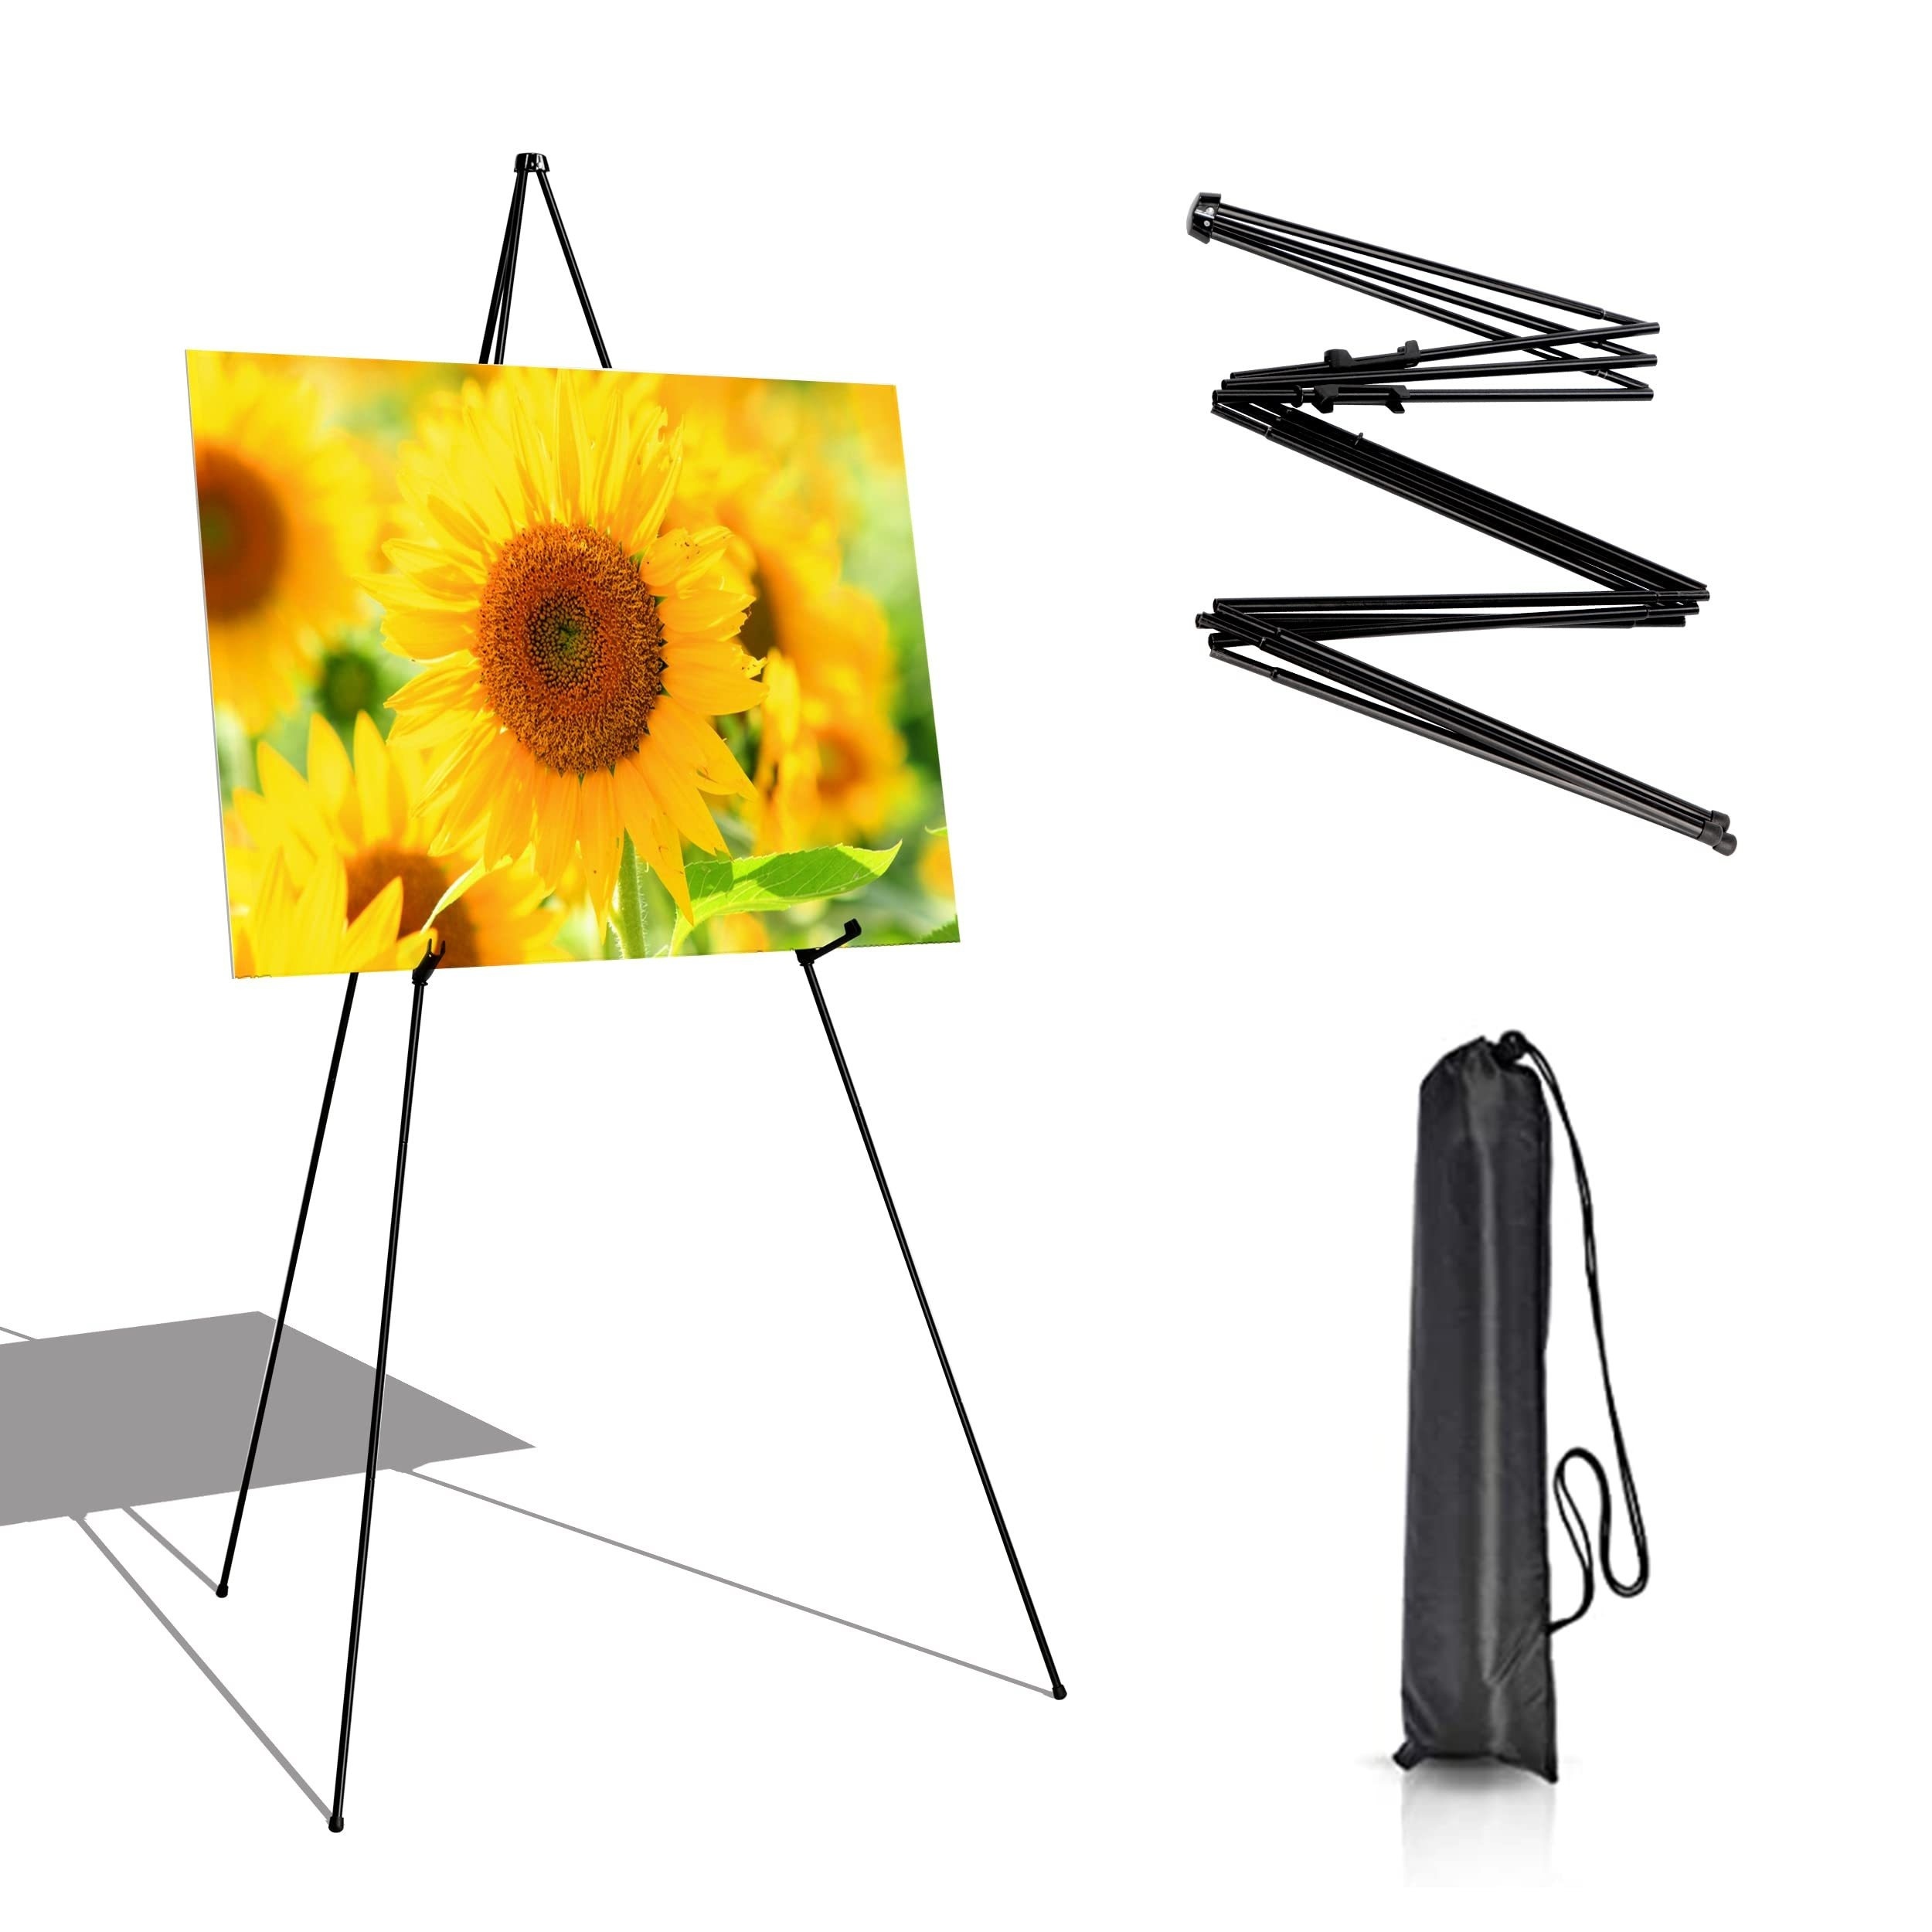 

Easel Stand For Display Wedding Sign & Poster - 63 Inches Tall Easle For Display Holder - Portable Collapsable Poster Easel - Floor Adjustable Metal Painting Easels Tripod Black